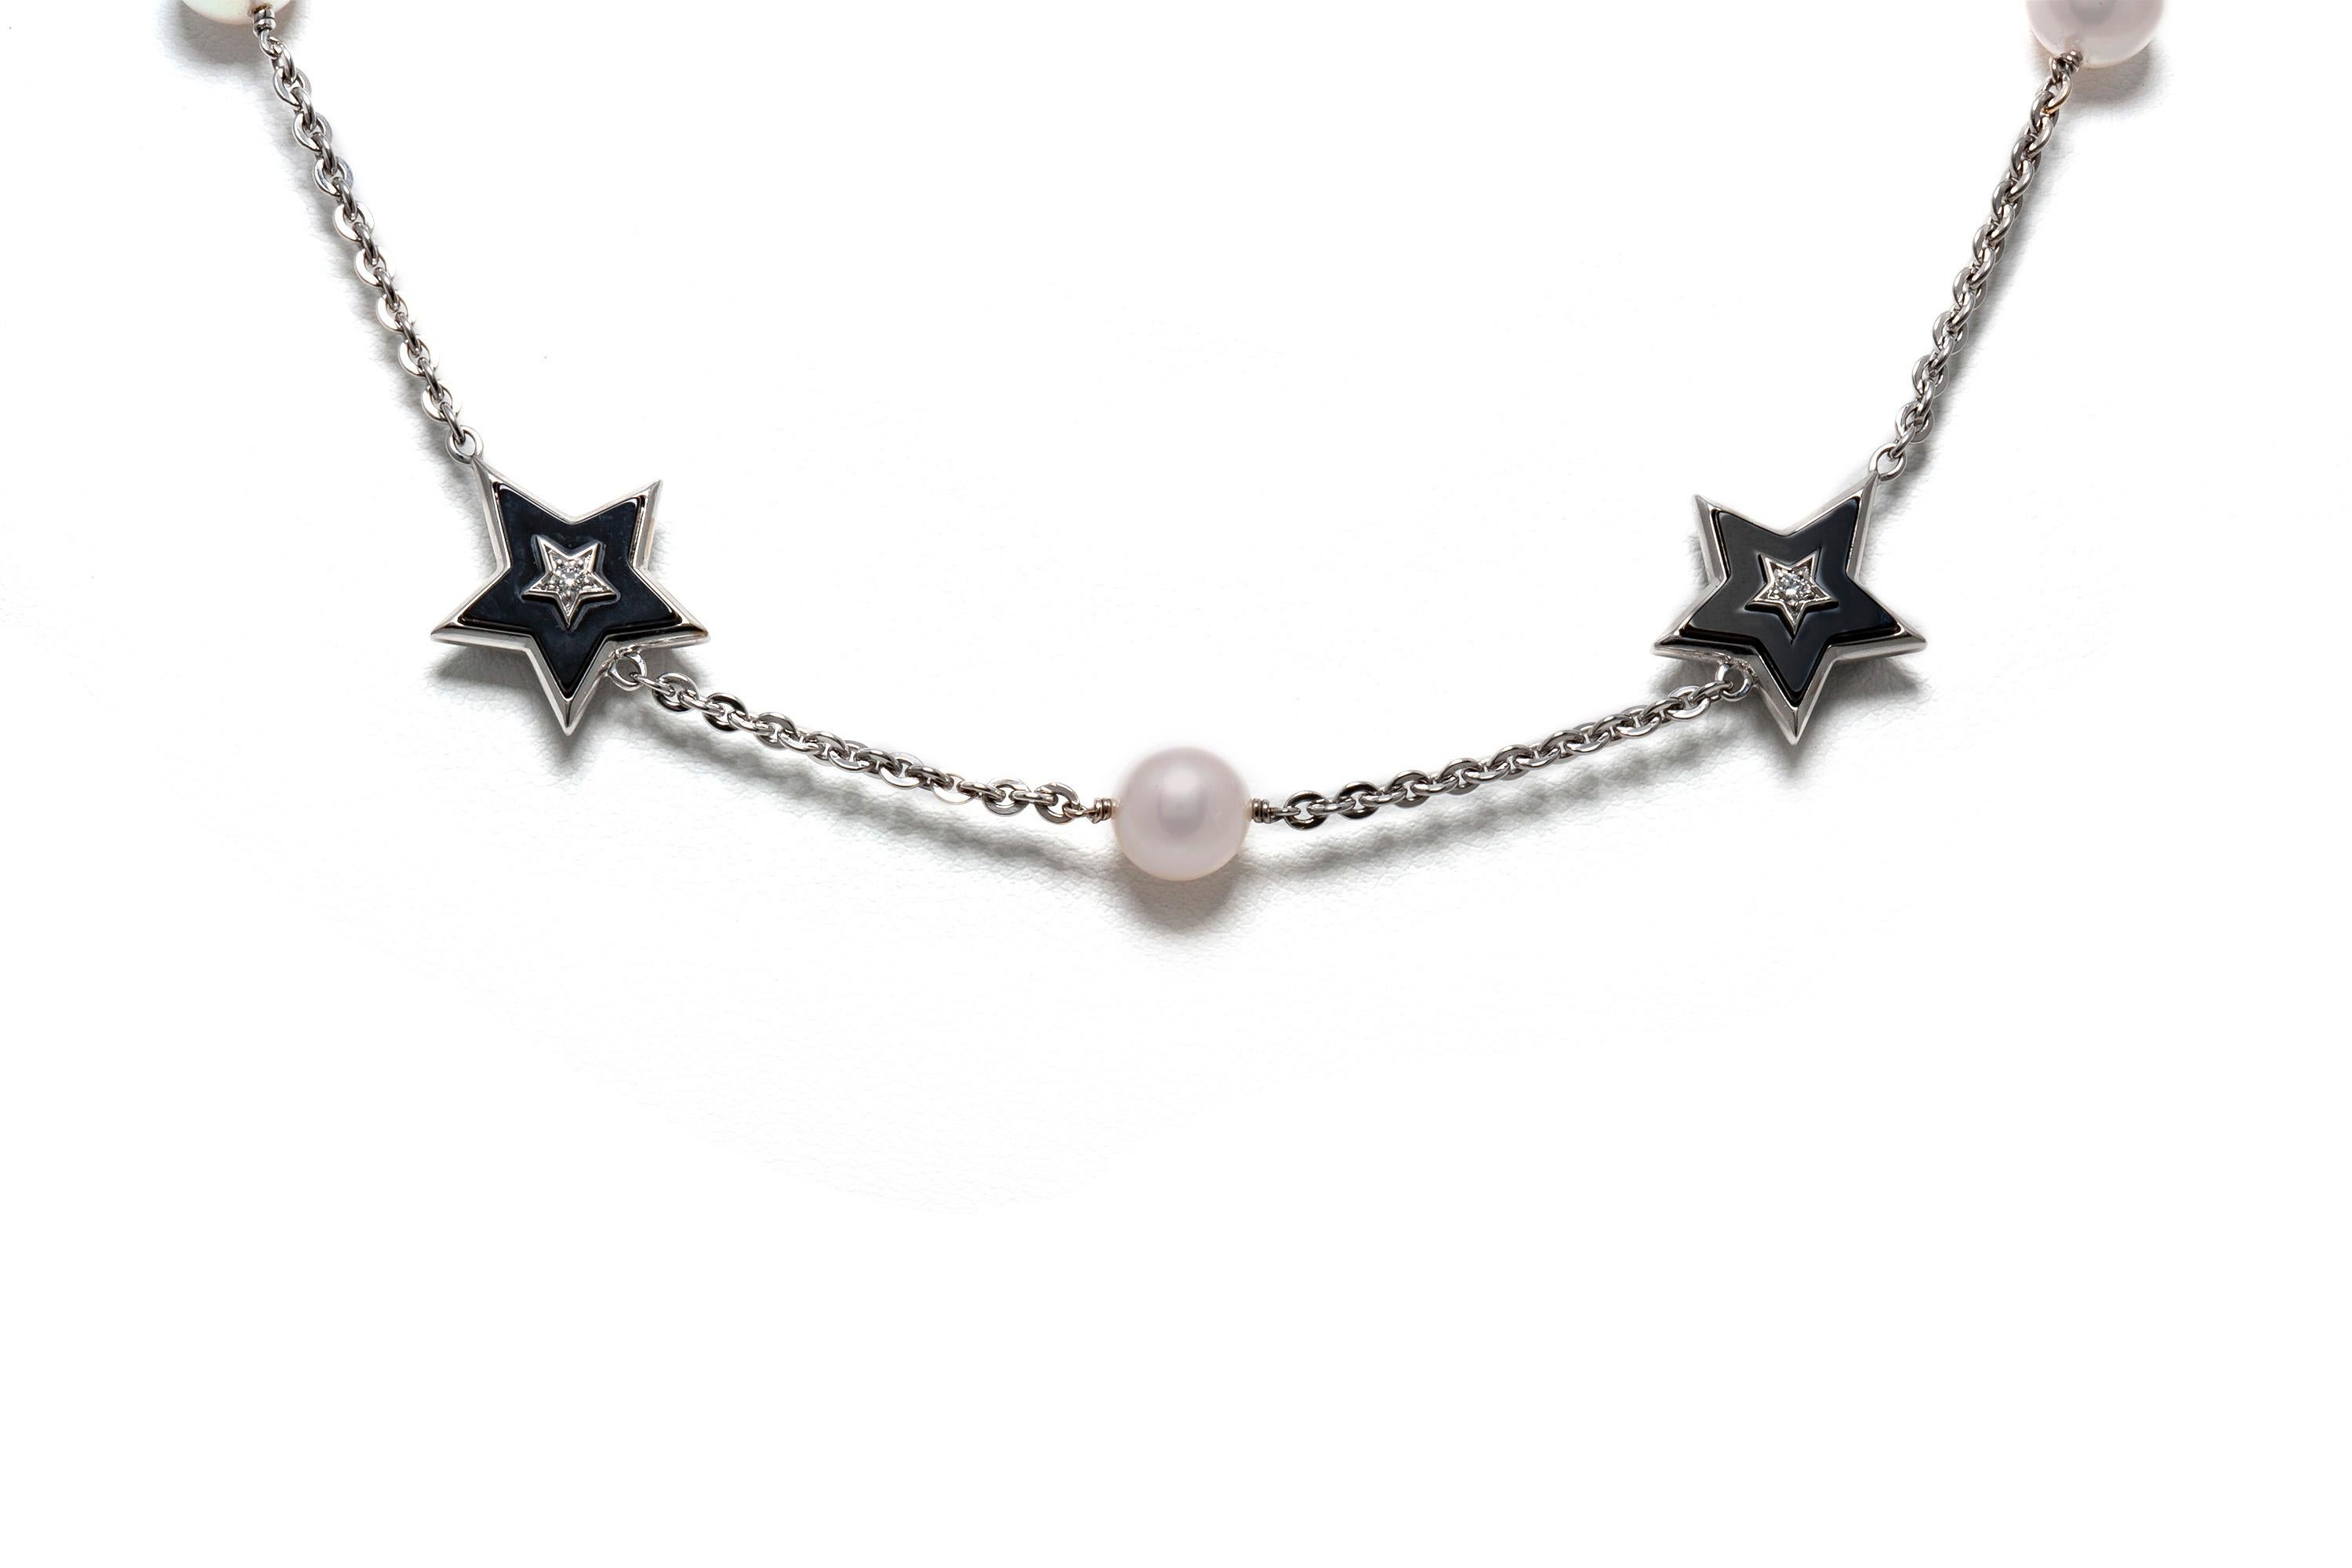 Chanel stars necklace, finely crafted in 18k white gold with pearls weighing approximately a total of 6.00 carats, onyx and diamonds.
